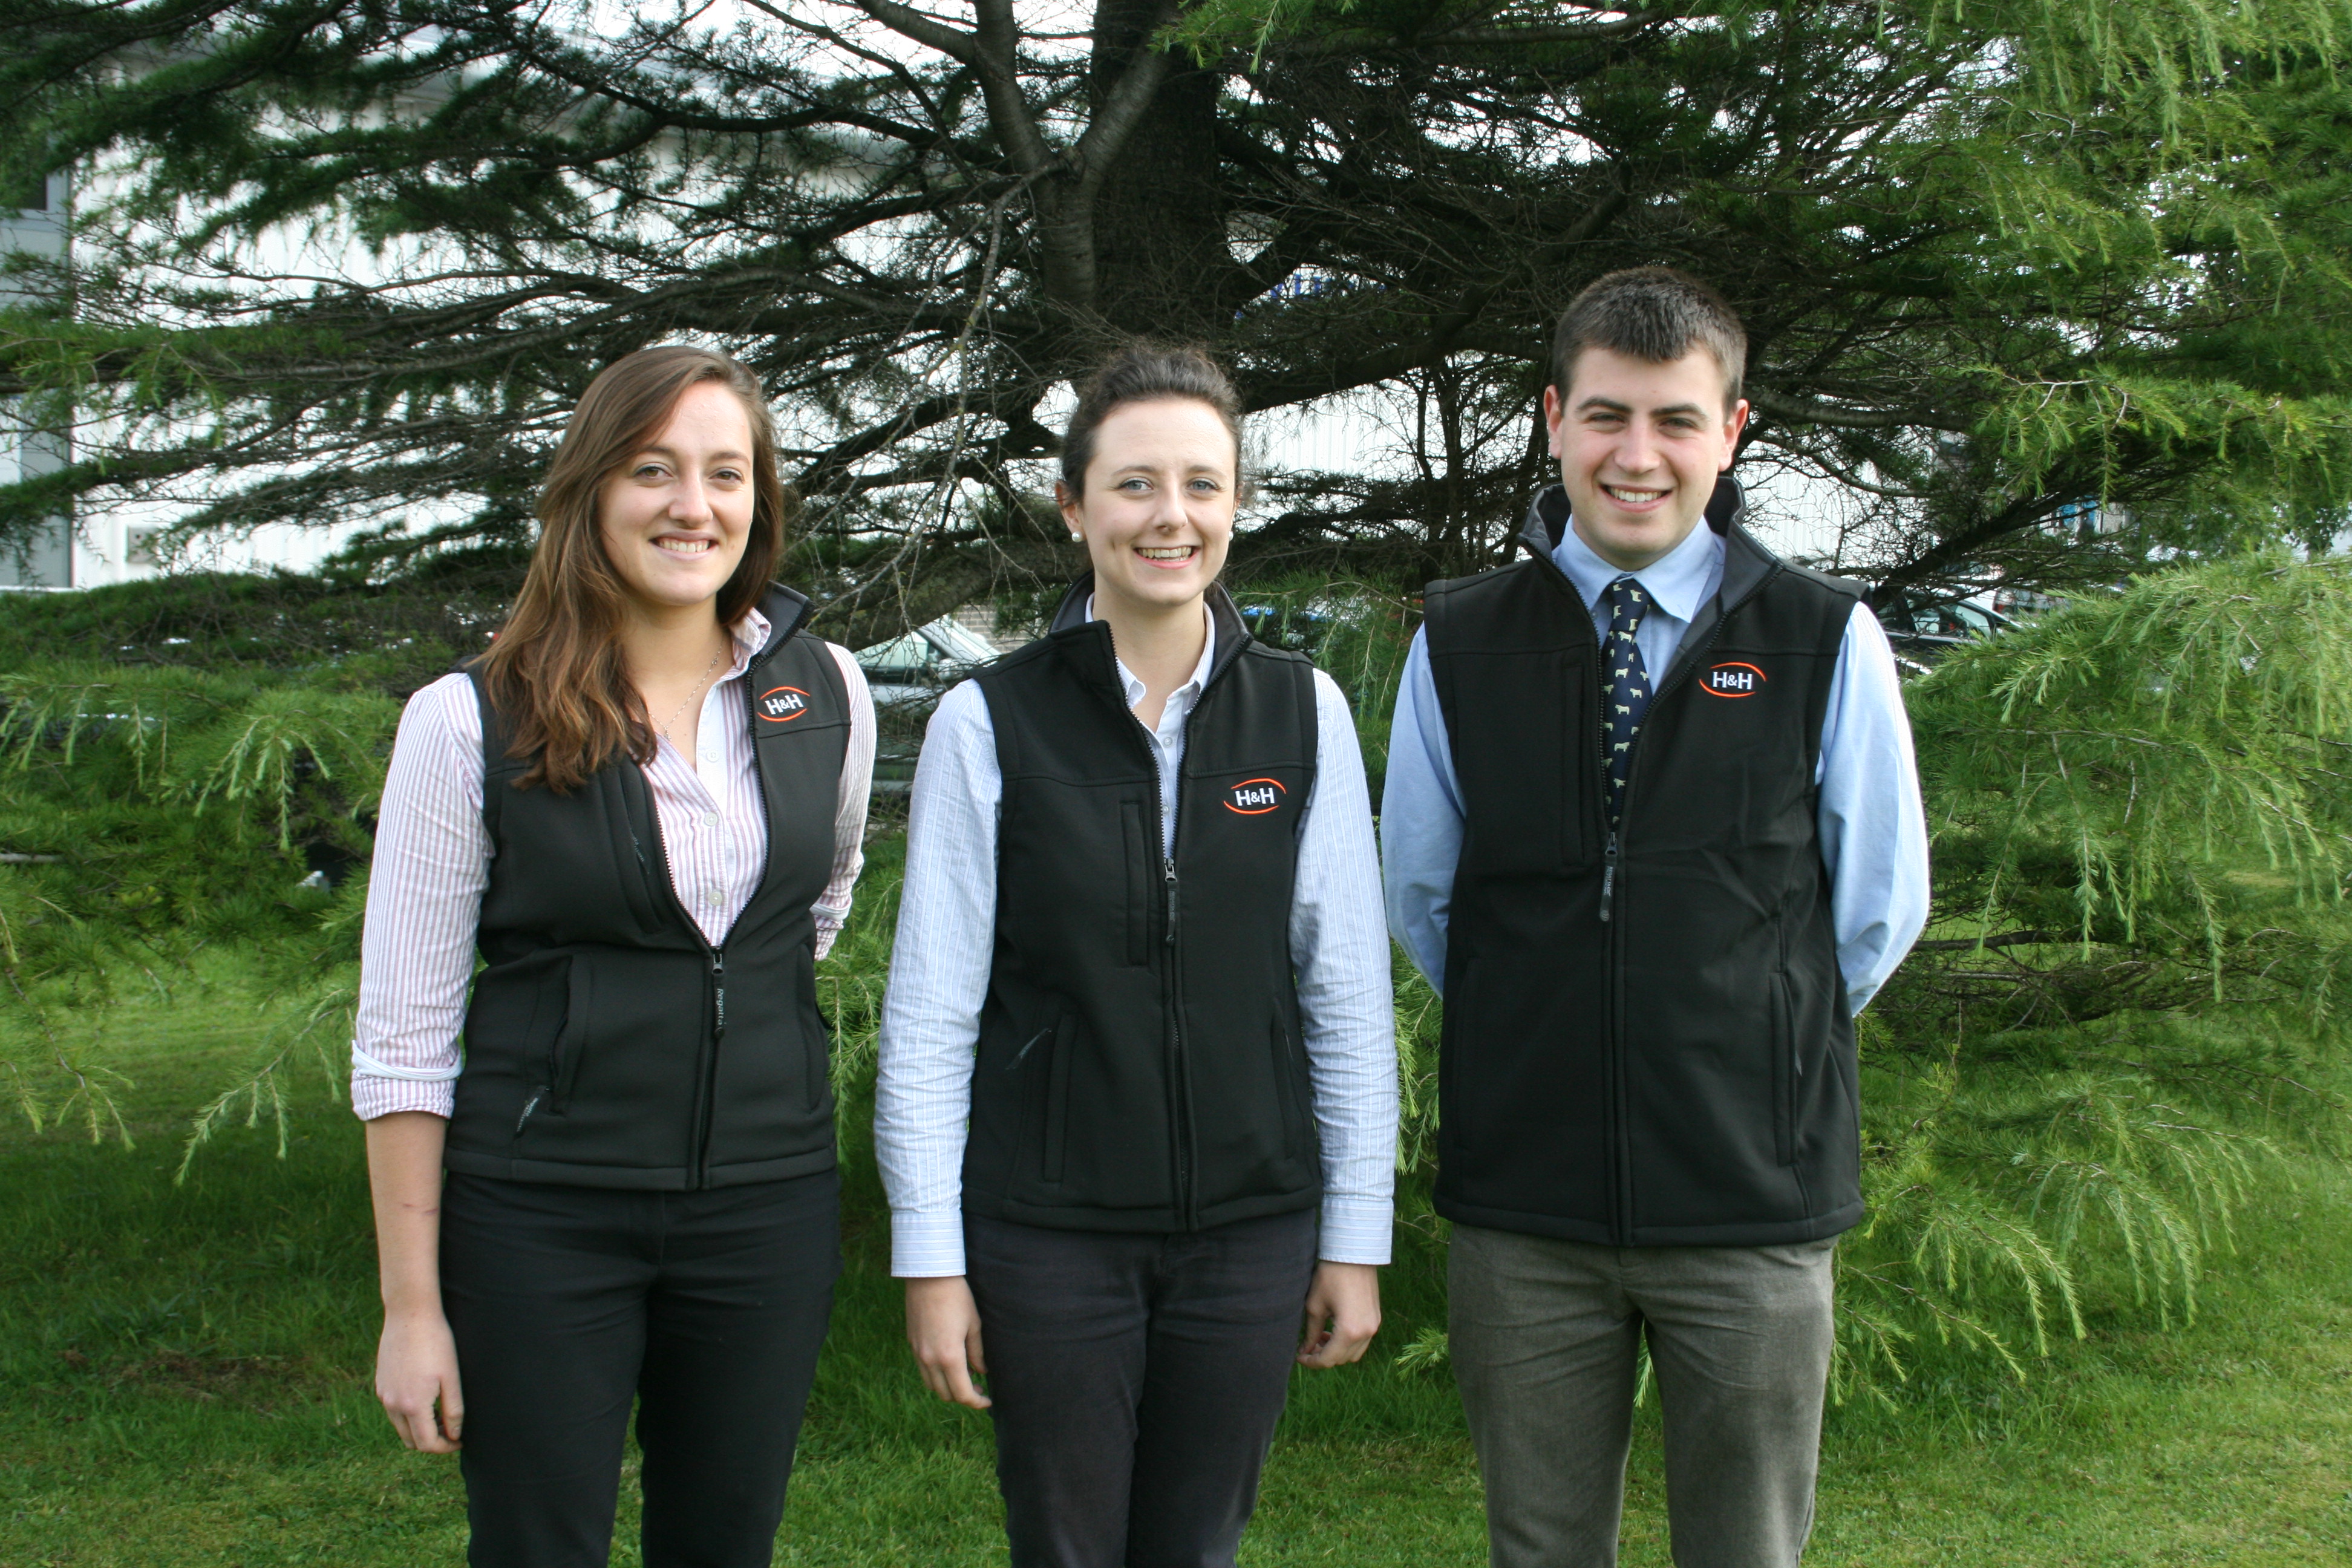 From left to right. Millie Etheridge (20), Sarah Kidd (20) and Jonathan Hird (20)